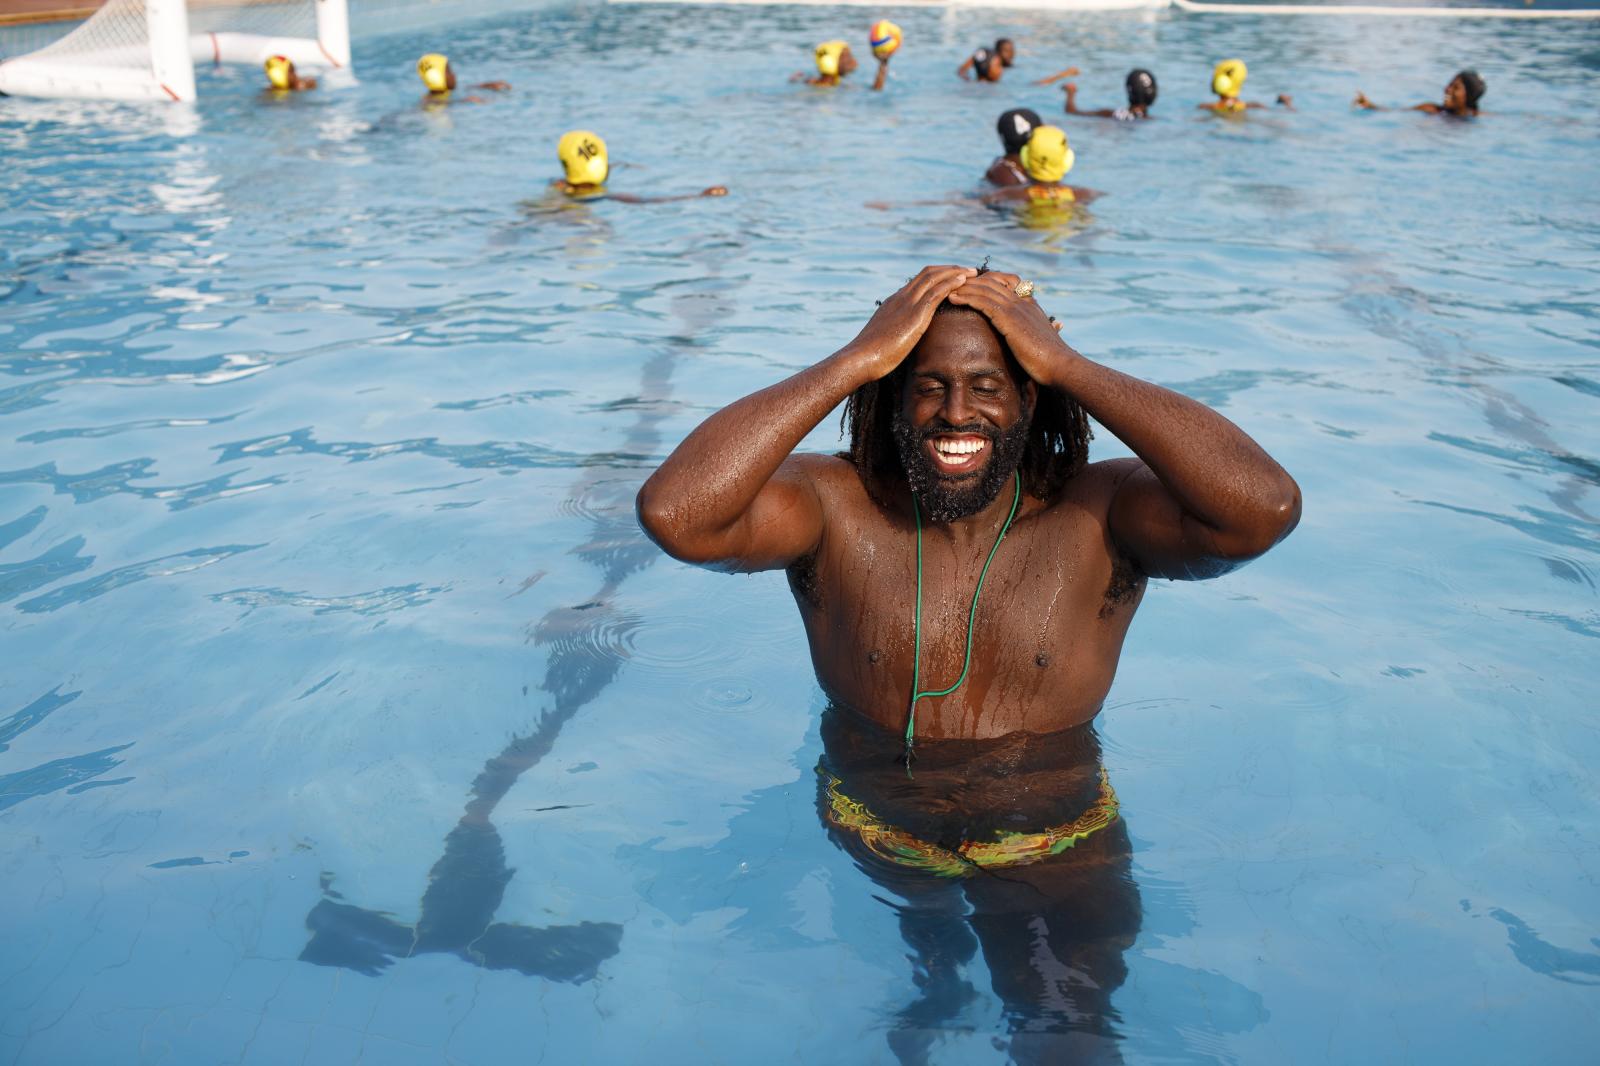 Image from Water Polo - Prince Asante, the founder of Ghana's Awutu Winton...